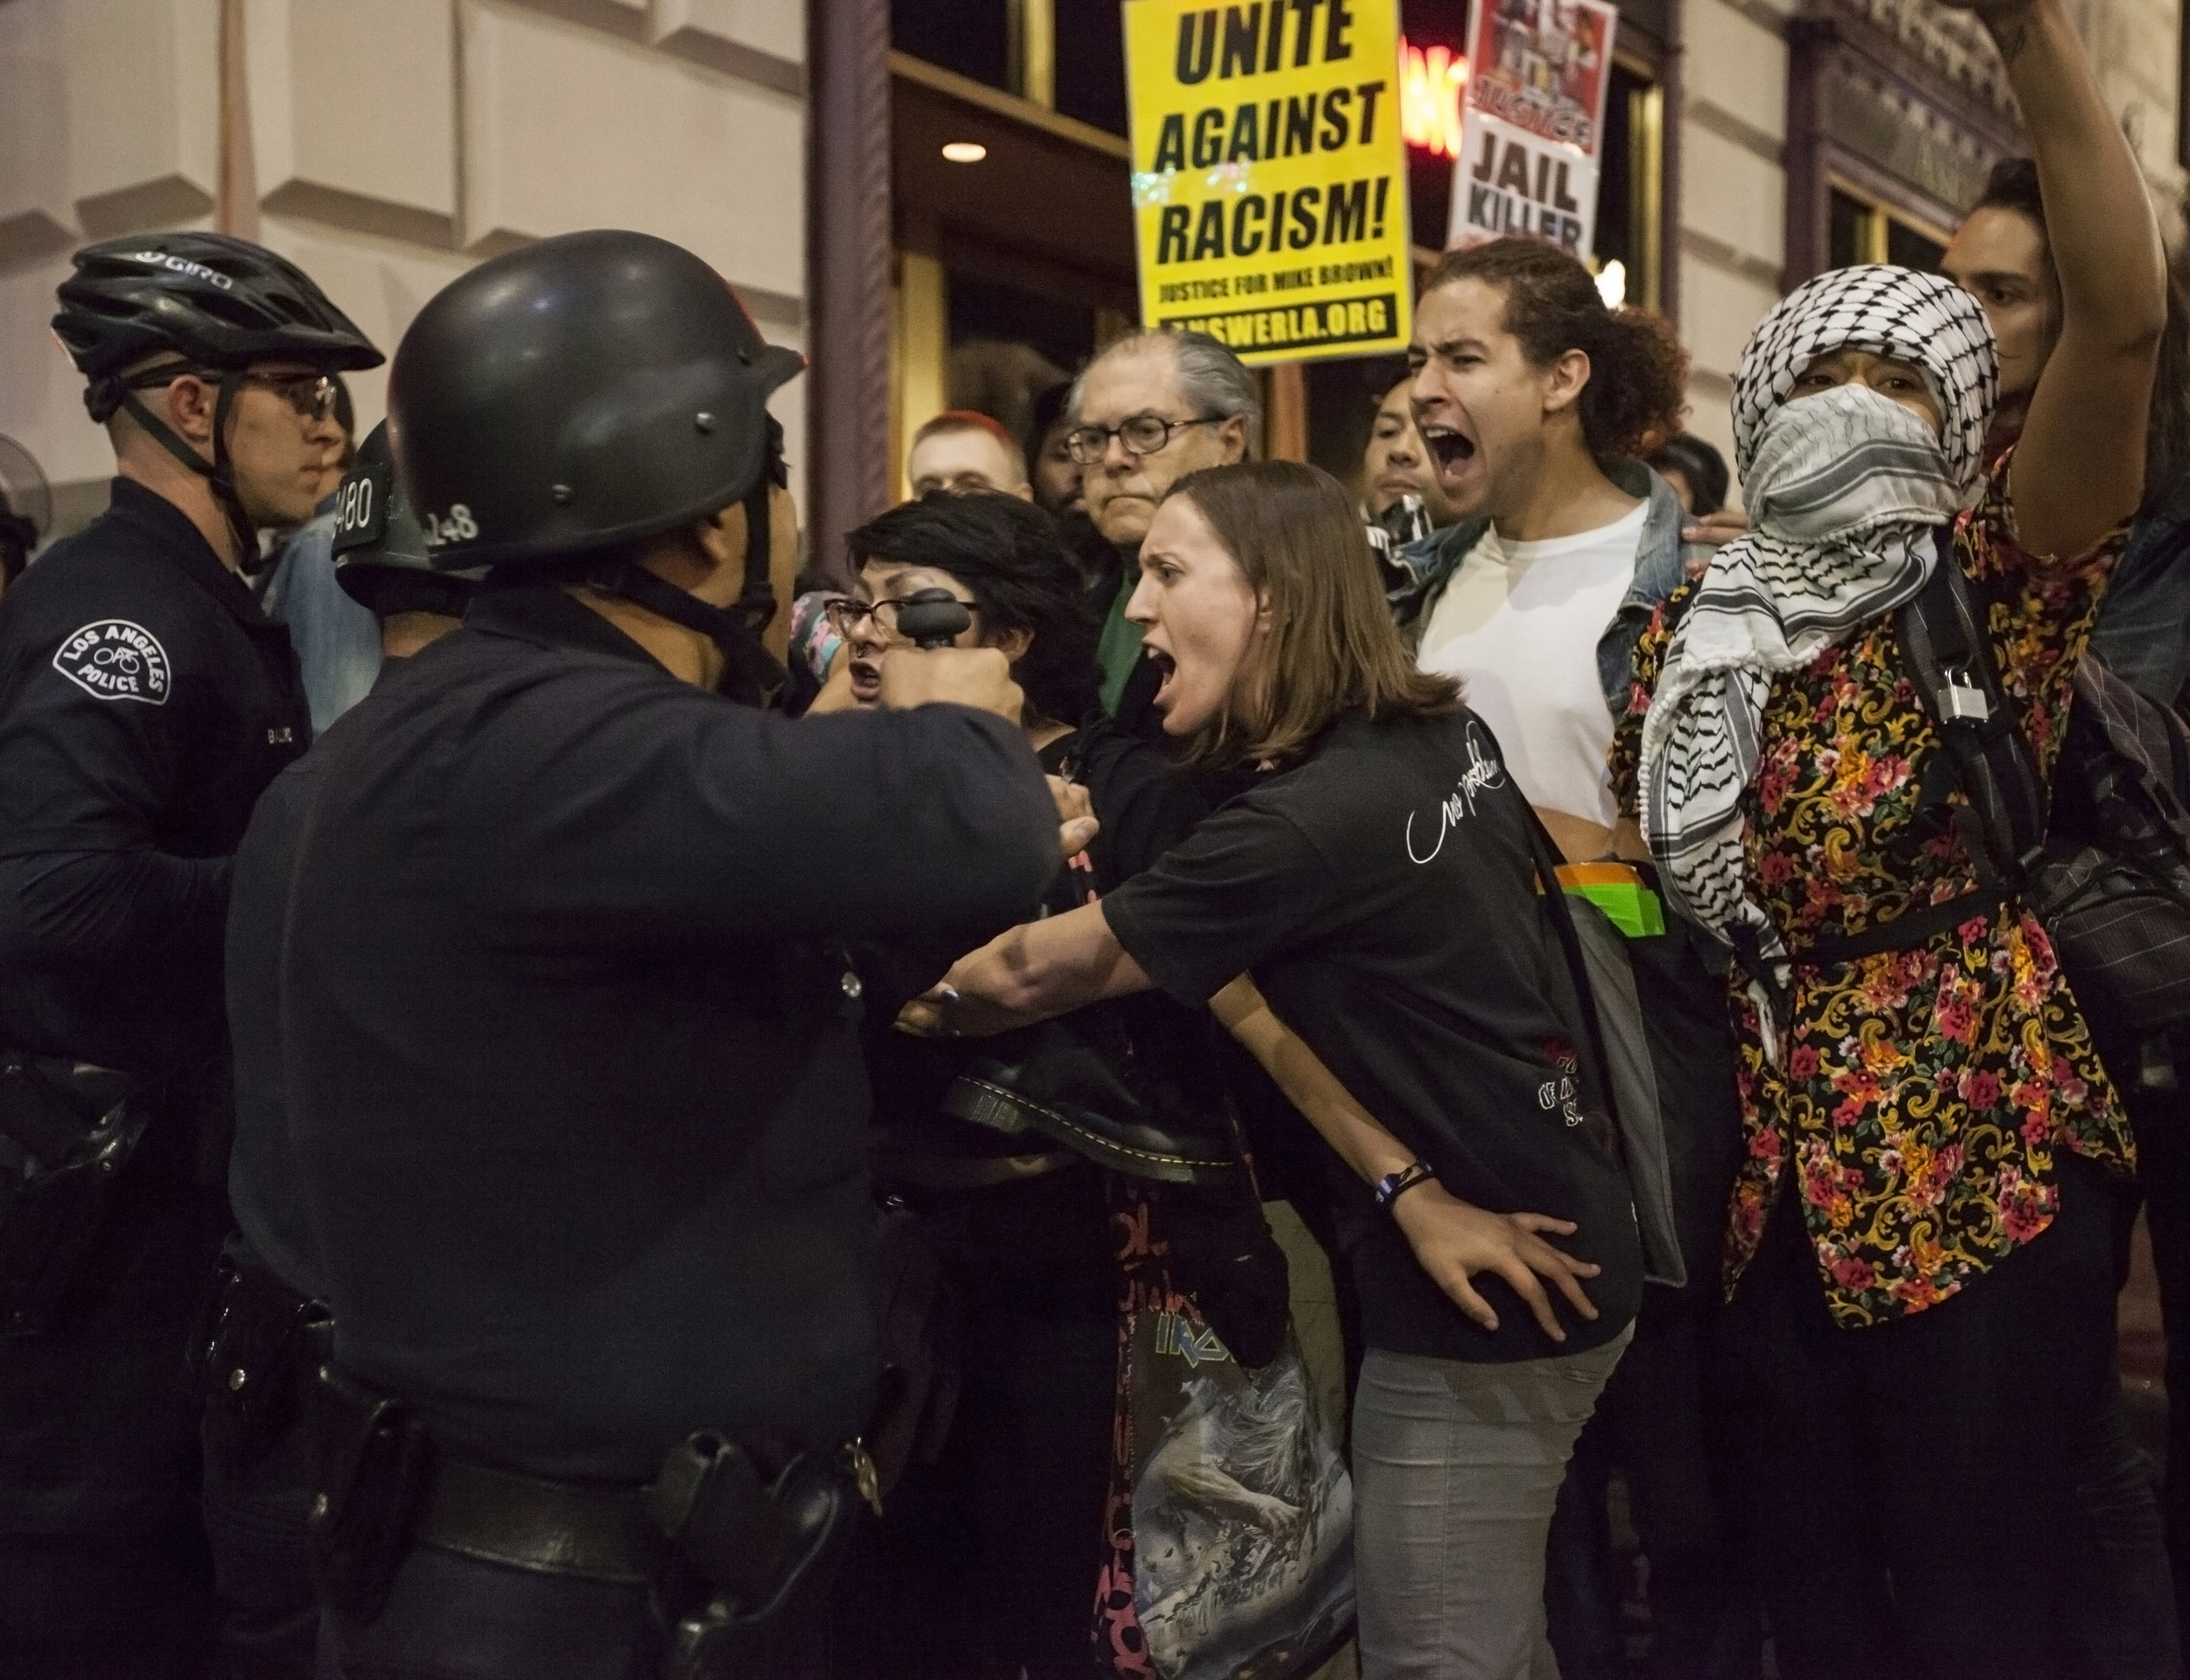  Emotions ran high between police and protesters during a rally in support of Mike Brown. LAPD officers created a bottleneck by blocking protesters with nowhere to exit. Soon after being blocked, the LAPD gave the protesters a four minute warning to 